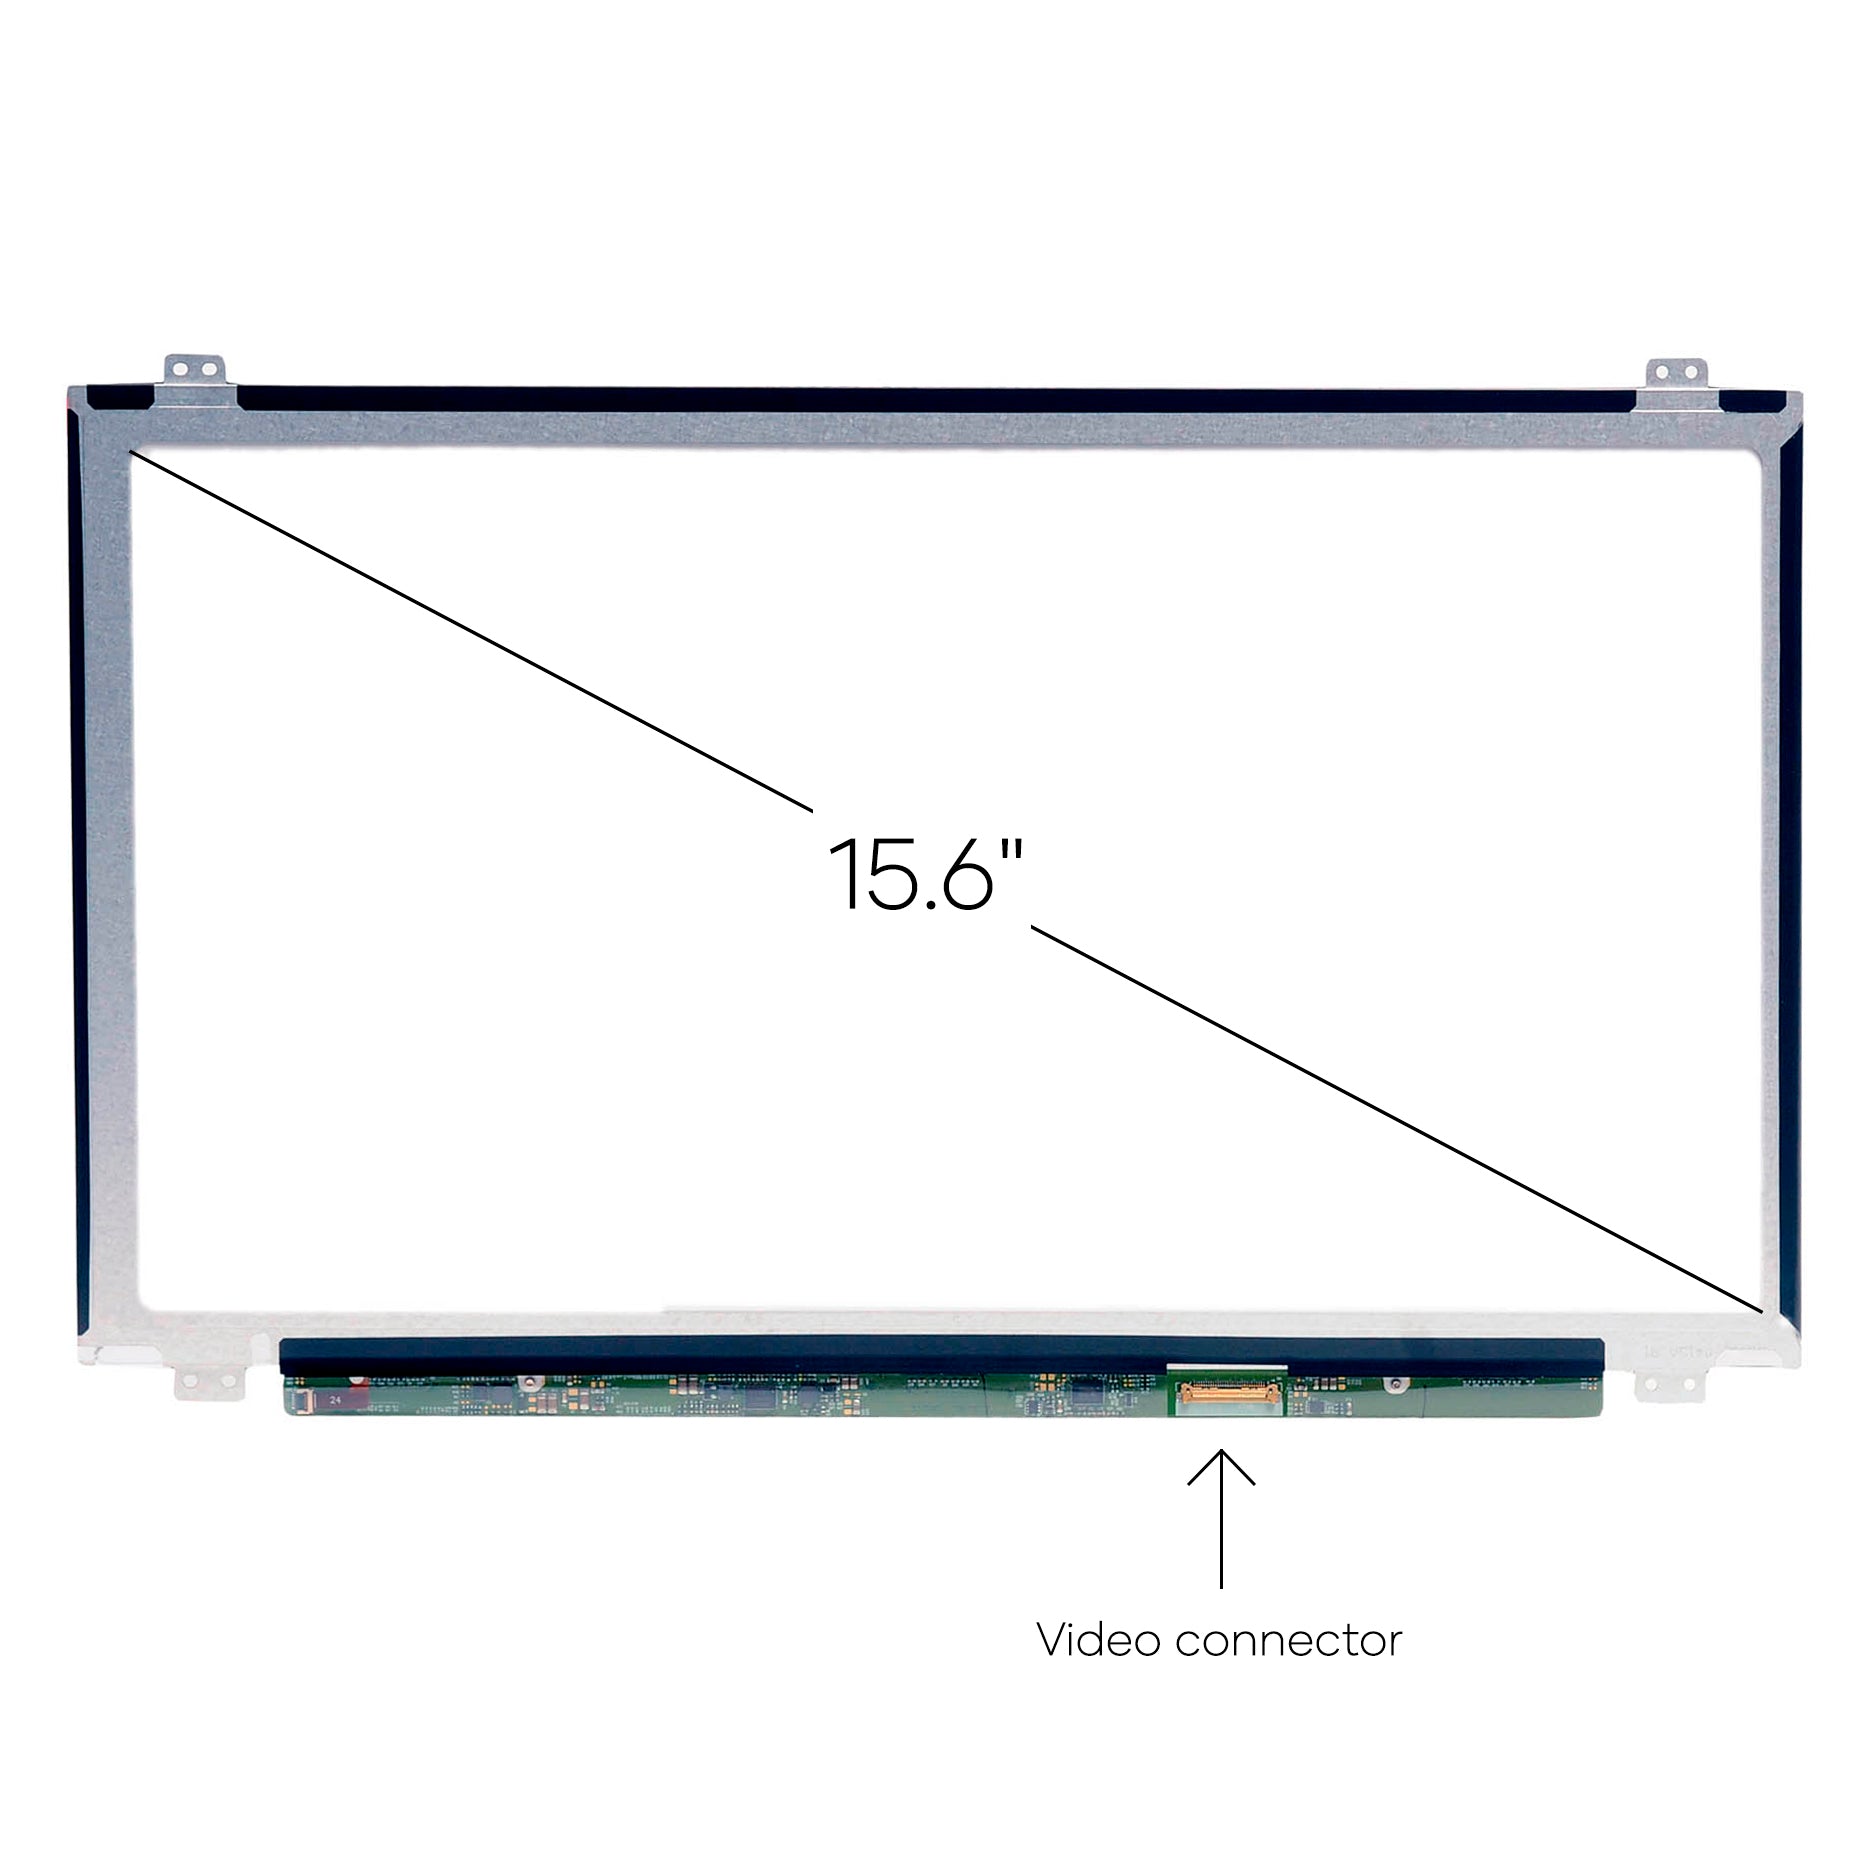 Screen Replacement for MSI GL62M 7REX FHD 1920x1080 High Gamut IPS Matte LCD LED Display